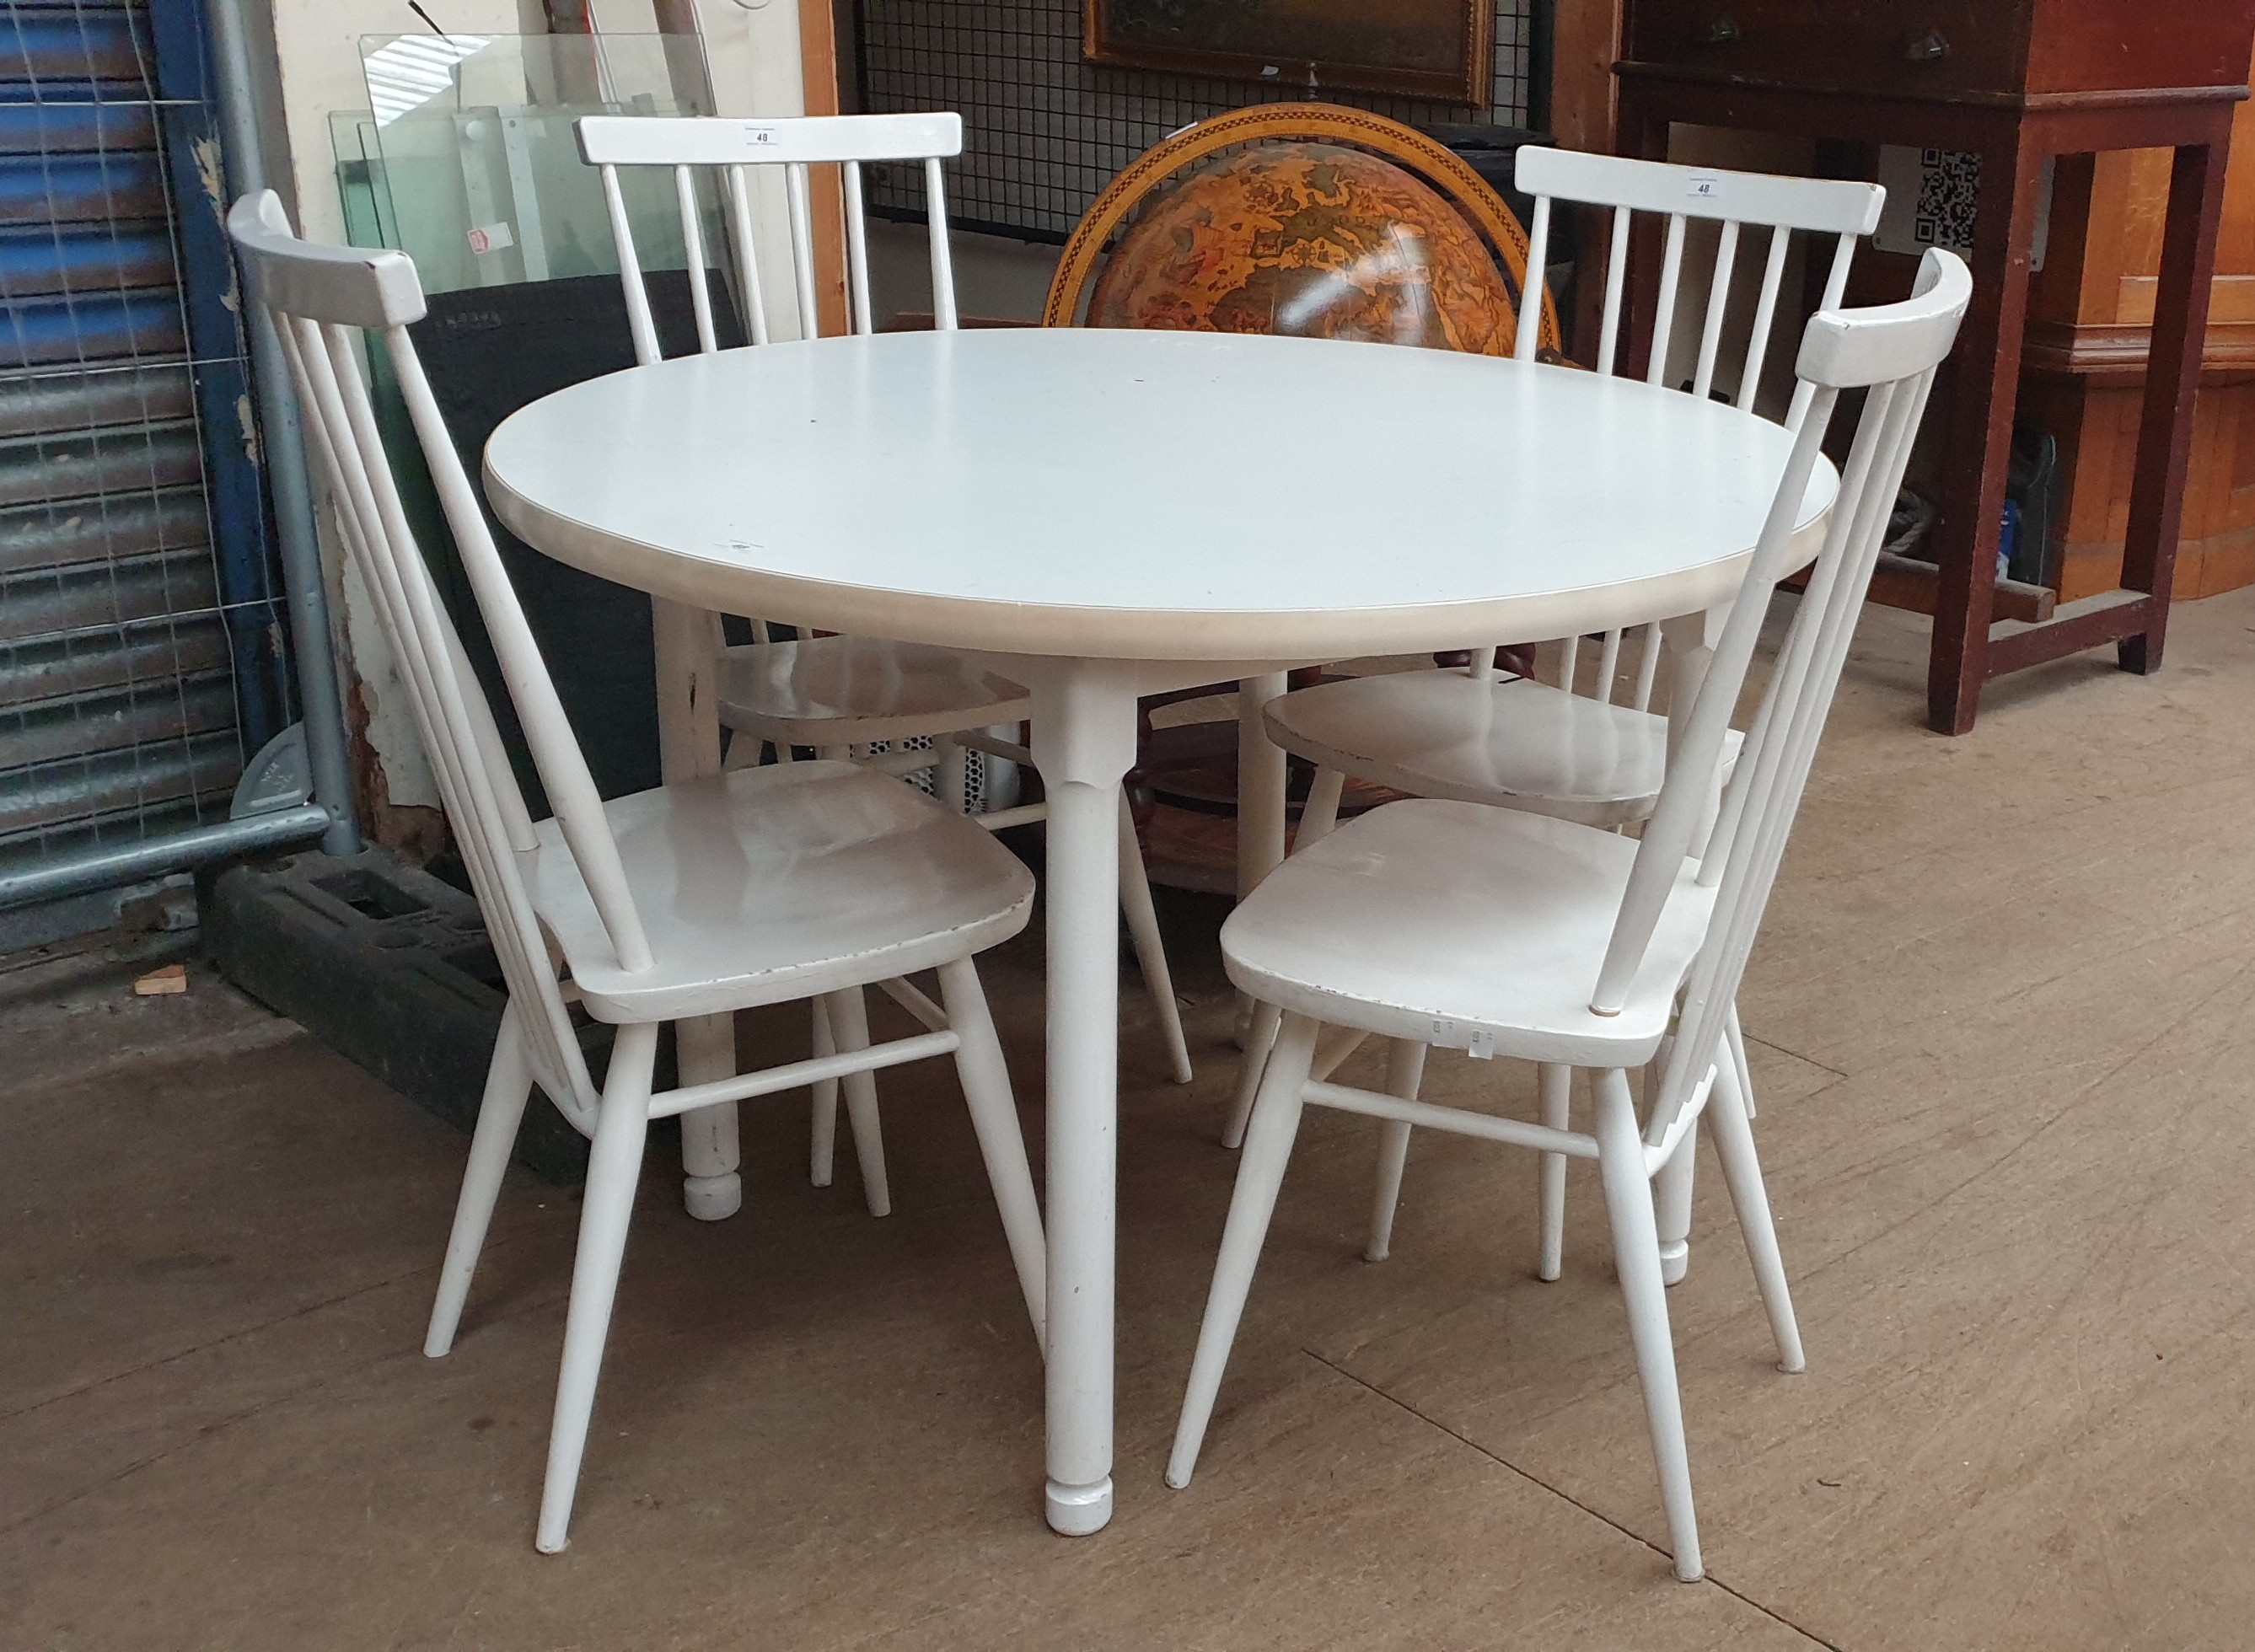 A mid 20th century white painted dining table and four chairs - Image 2 of 3